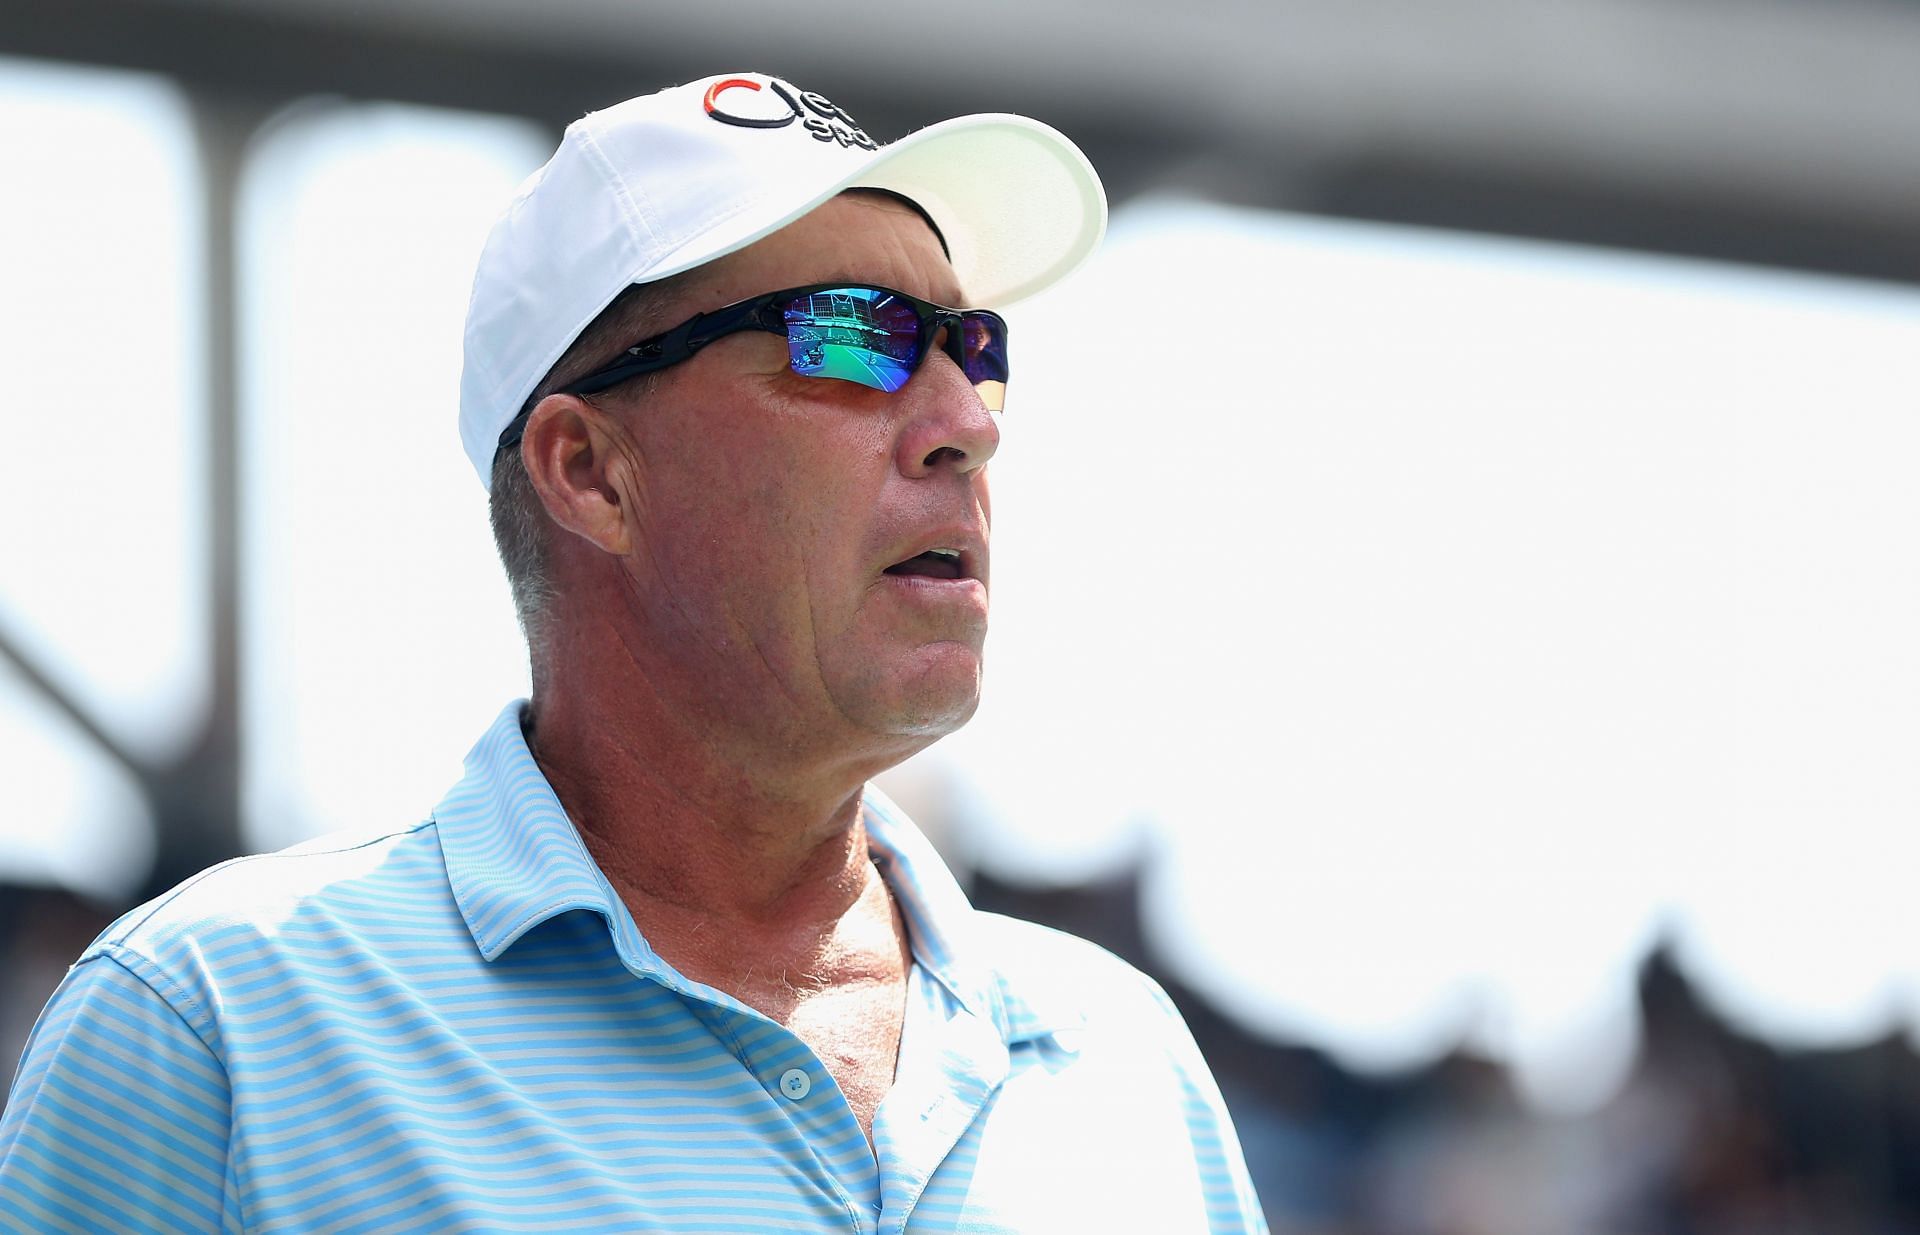 Ivan Lendl enjoyed a perfect record against Tim Mayotte